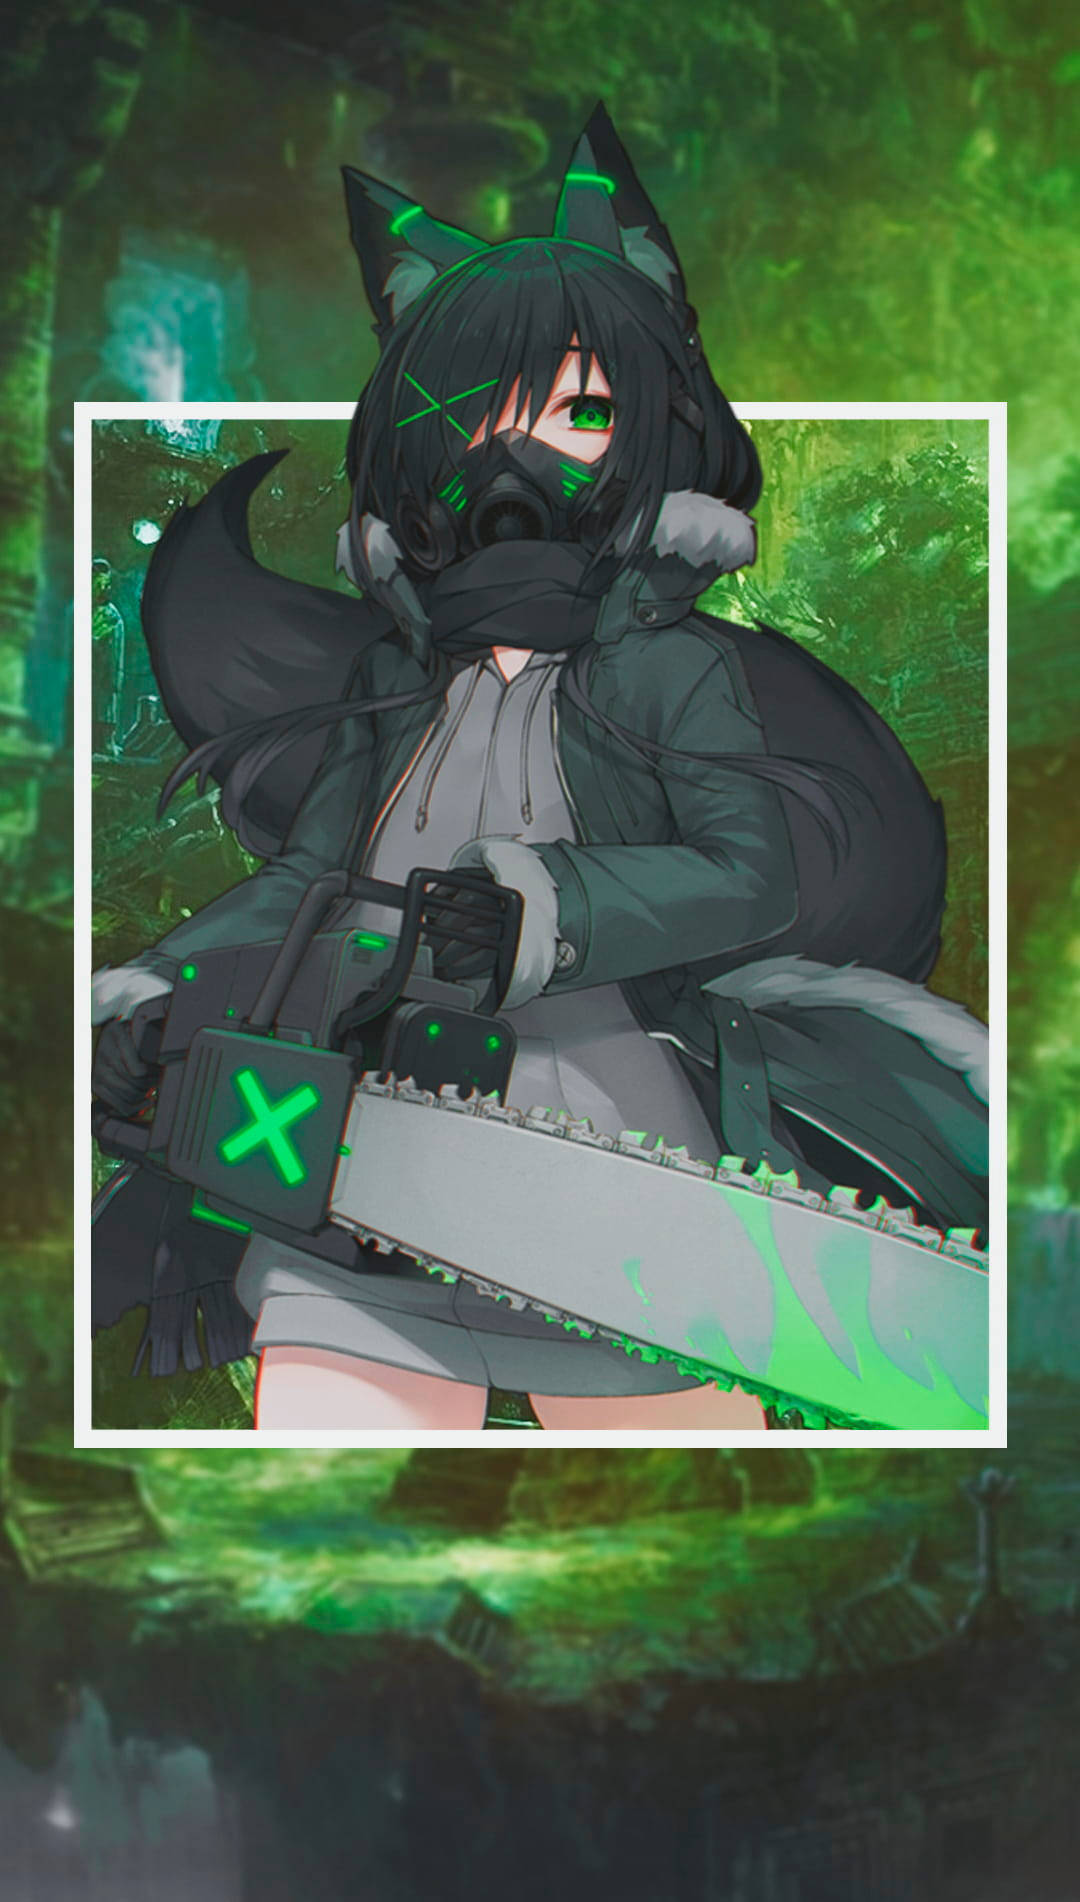 Green anime frog girl with text